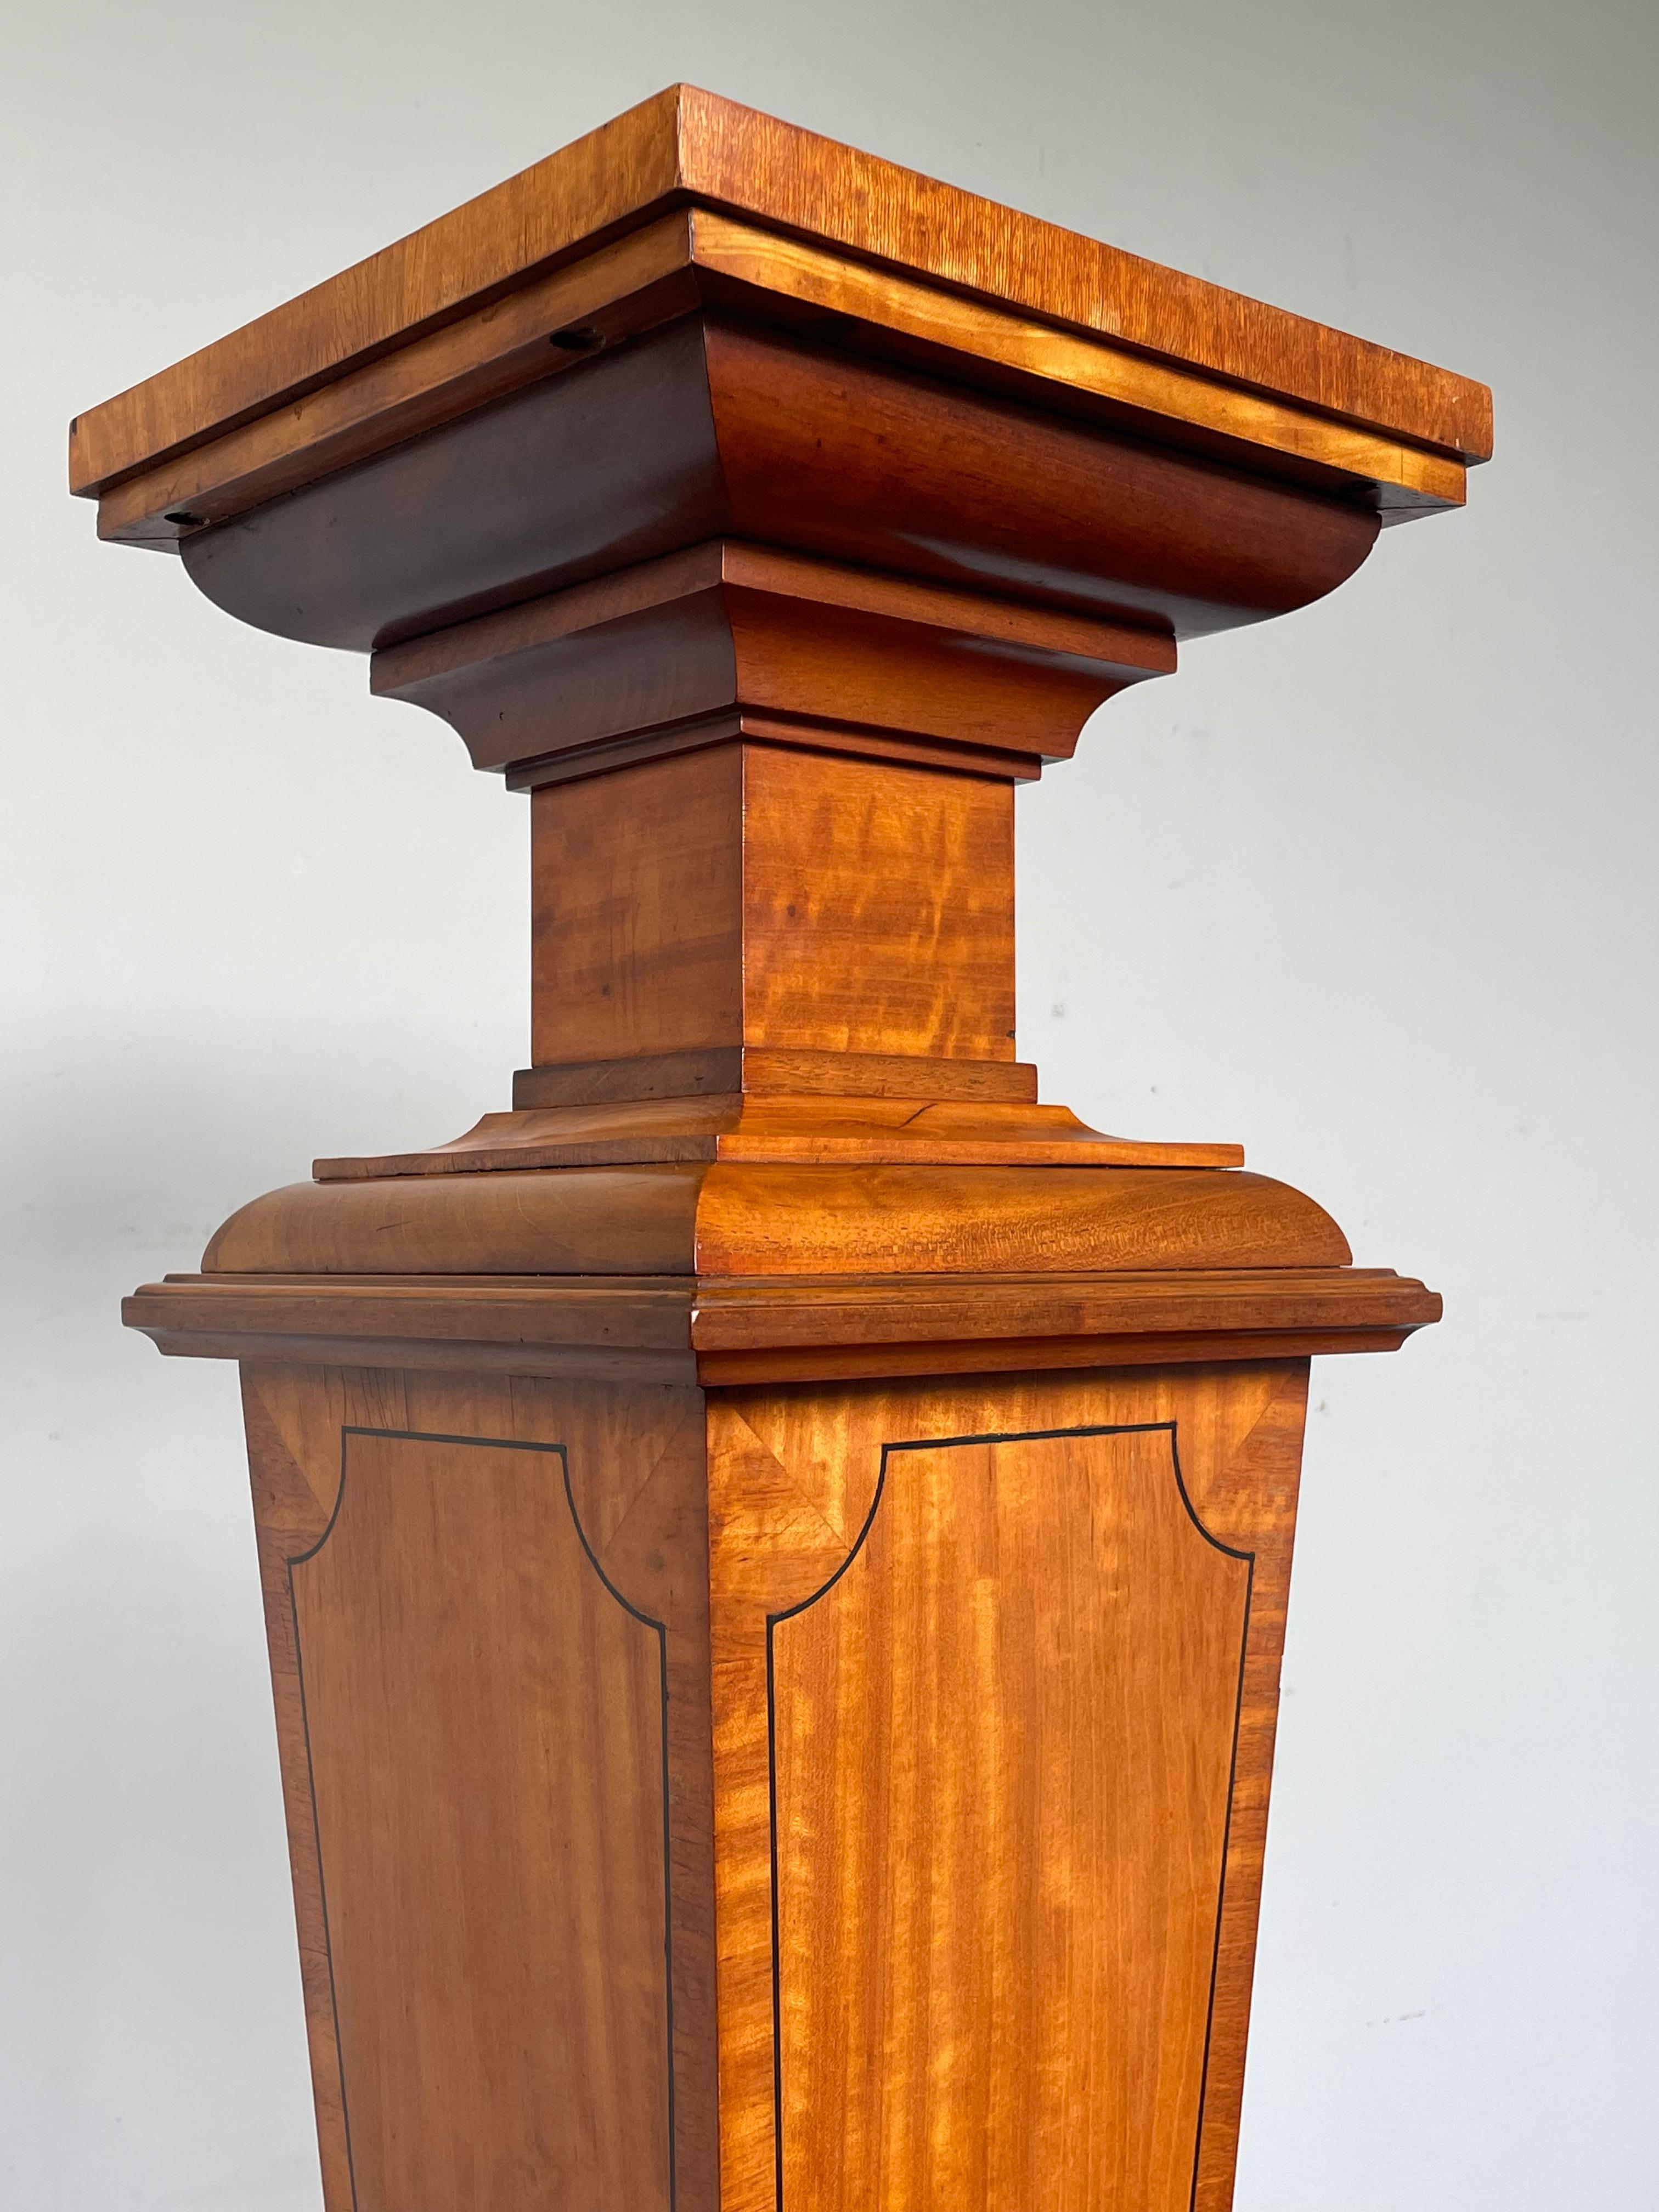 Wonderful column for displaying a work of art or otherwise.

This antique and classical design pedestal is perfect for showcasing an antique sculpture, vase or bust. Almost every color will contrast beautifully against the predominantly light